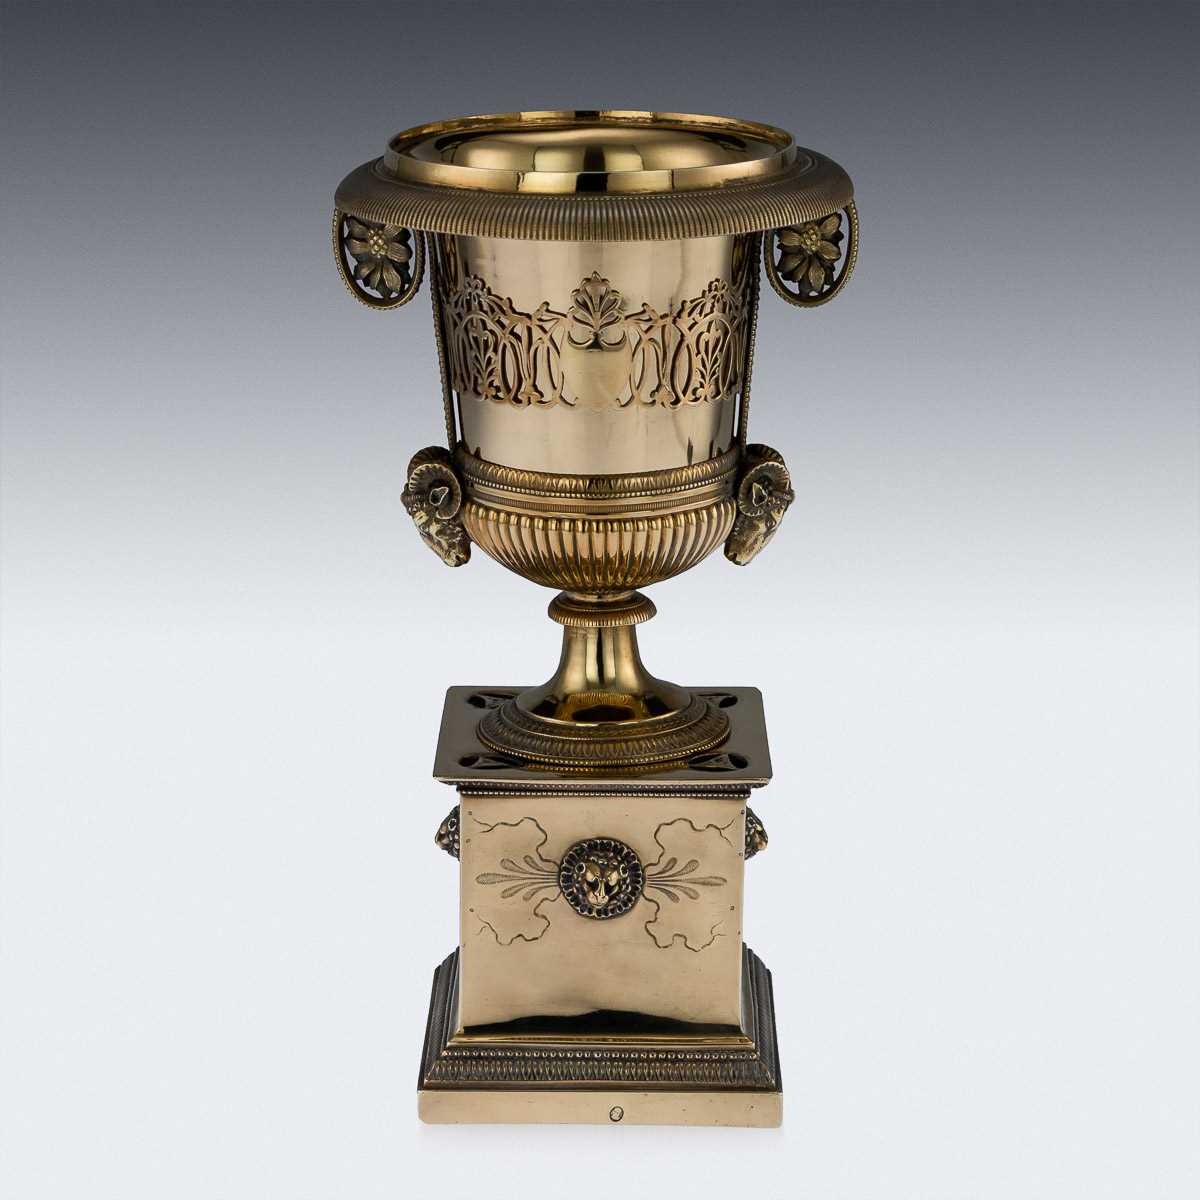 AN EARLY 19TH CENTURY SILVER GILT URN BY MARC JACQUART, PARIS - Image 17 of 19